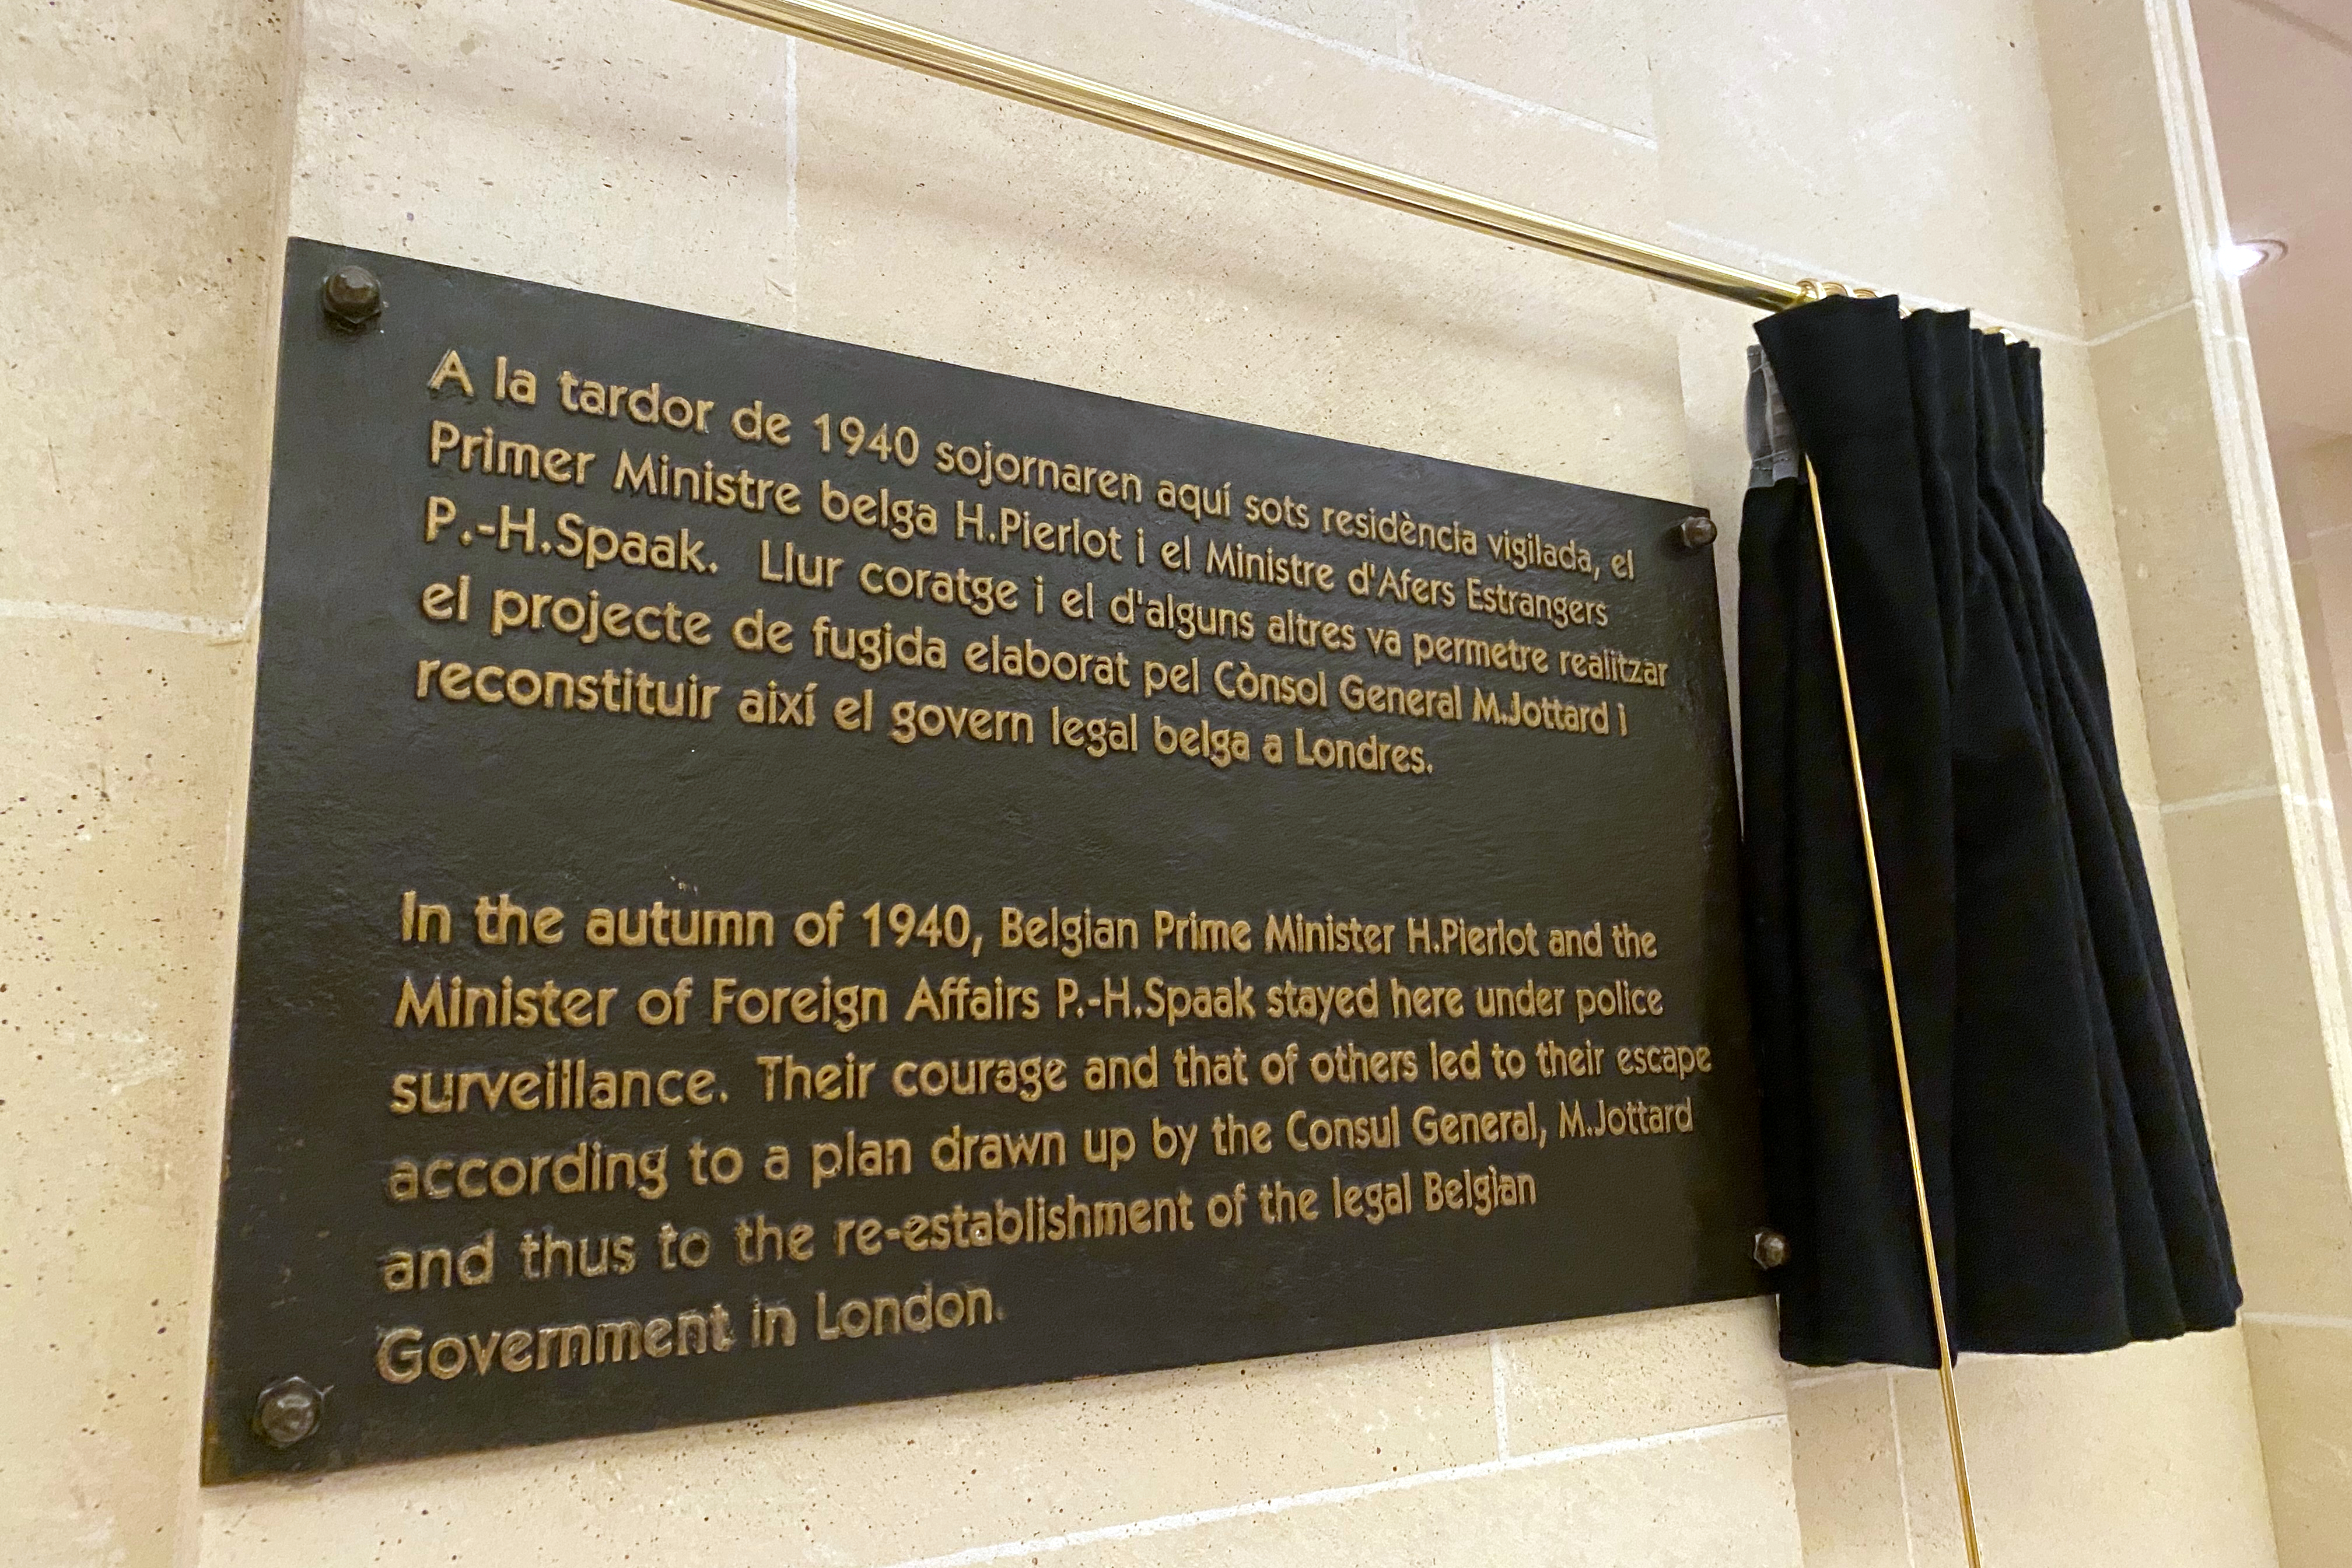 Commemorative plaque installed in Barcelona's Majestic Hotel remembering the flight from the Catalan city of Belgian PM Pierlot and the minister of foreign affairs Spaak in 1940